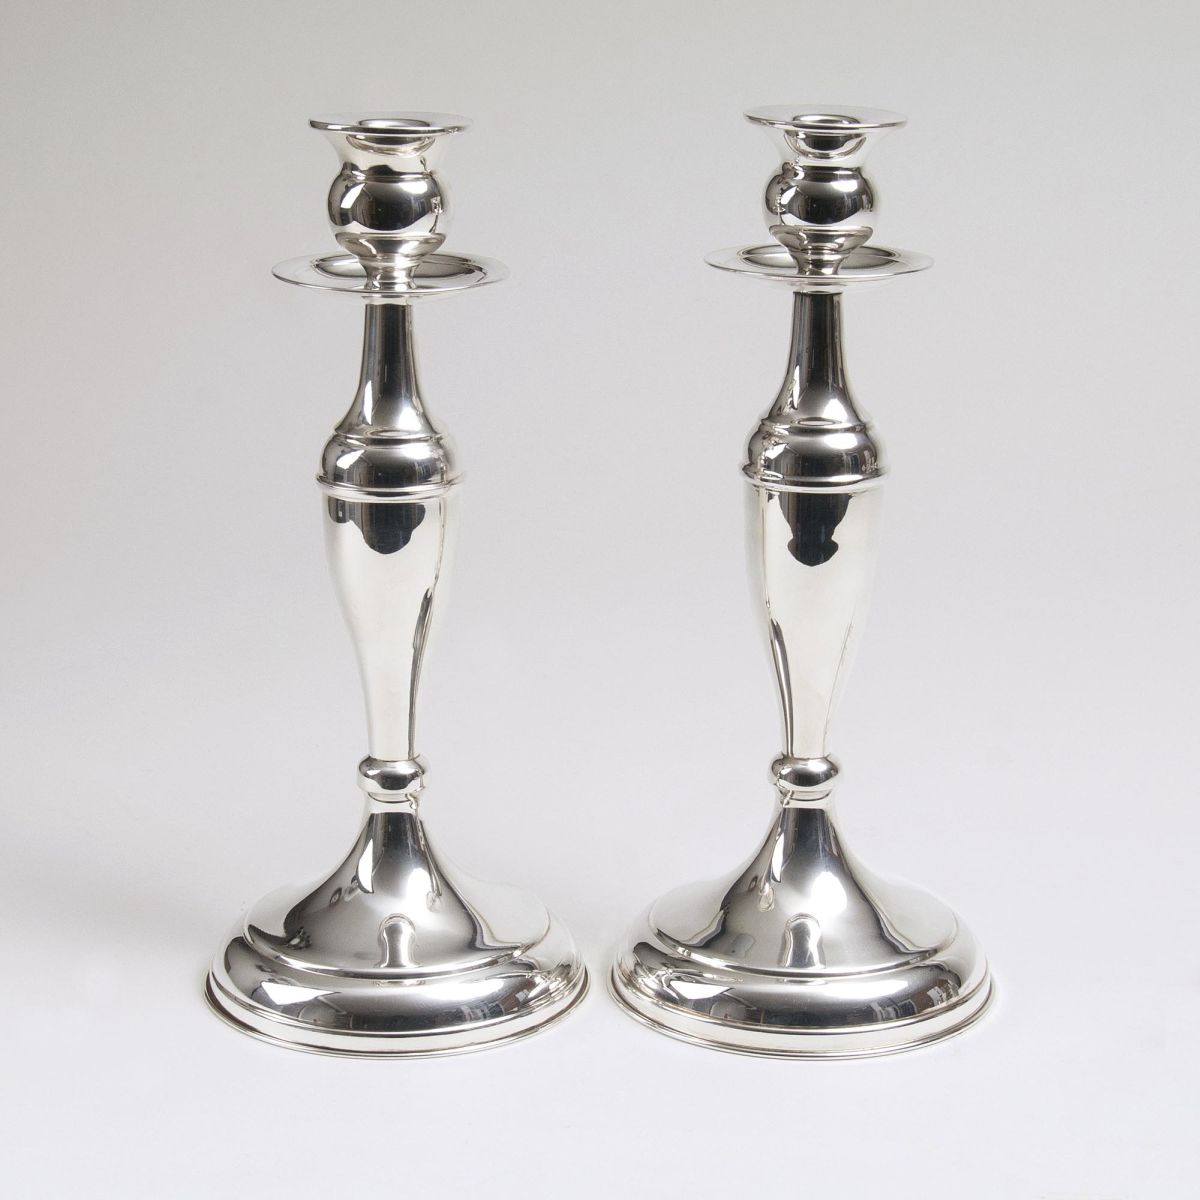 A Pair of Classical Candle Holders